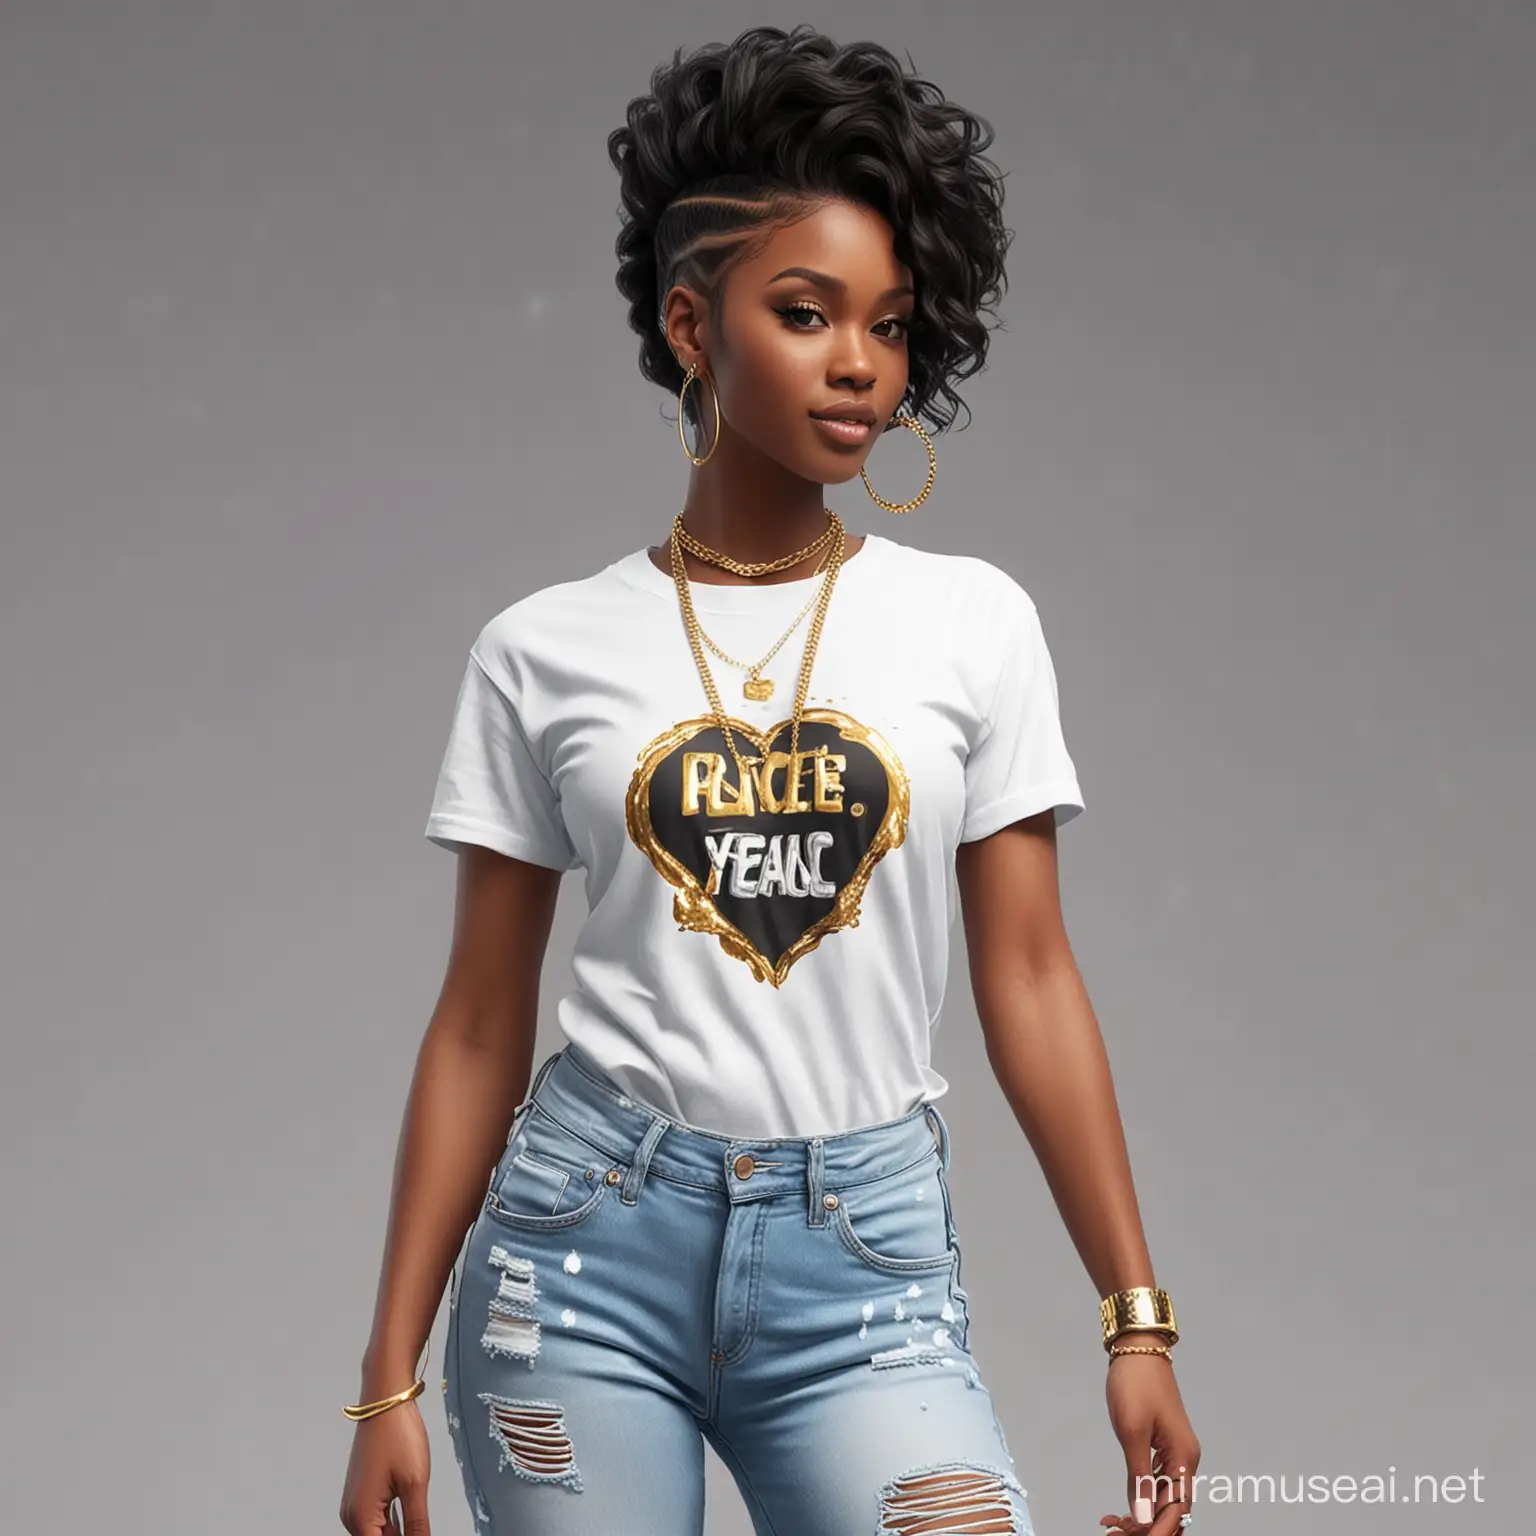 Black Female in Casual Outfit with IcedOut Jewelry